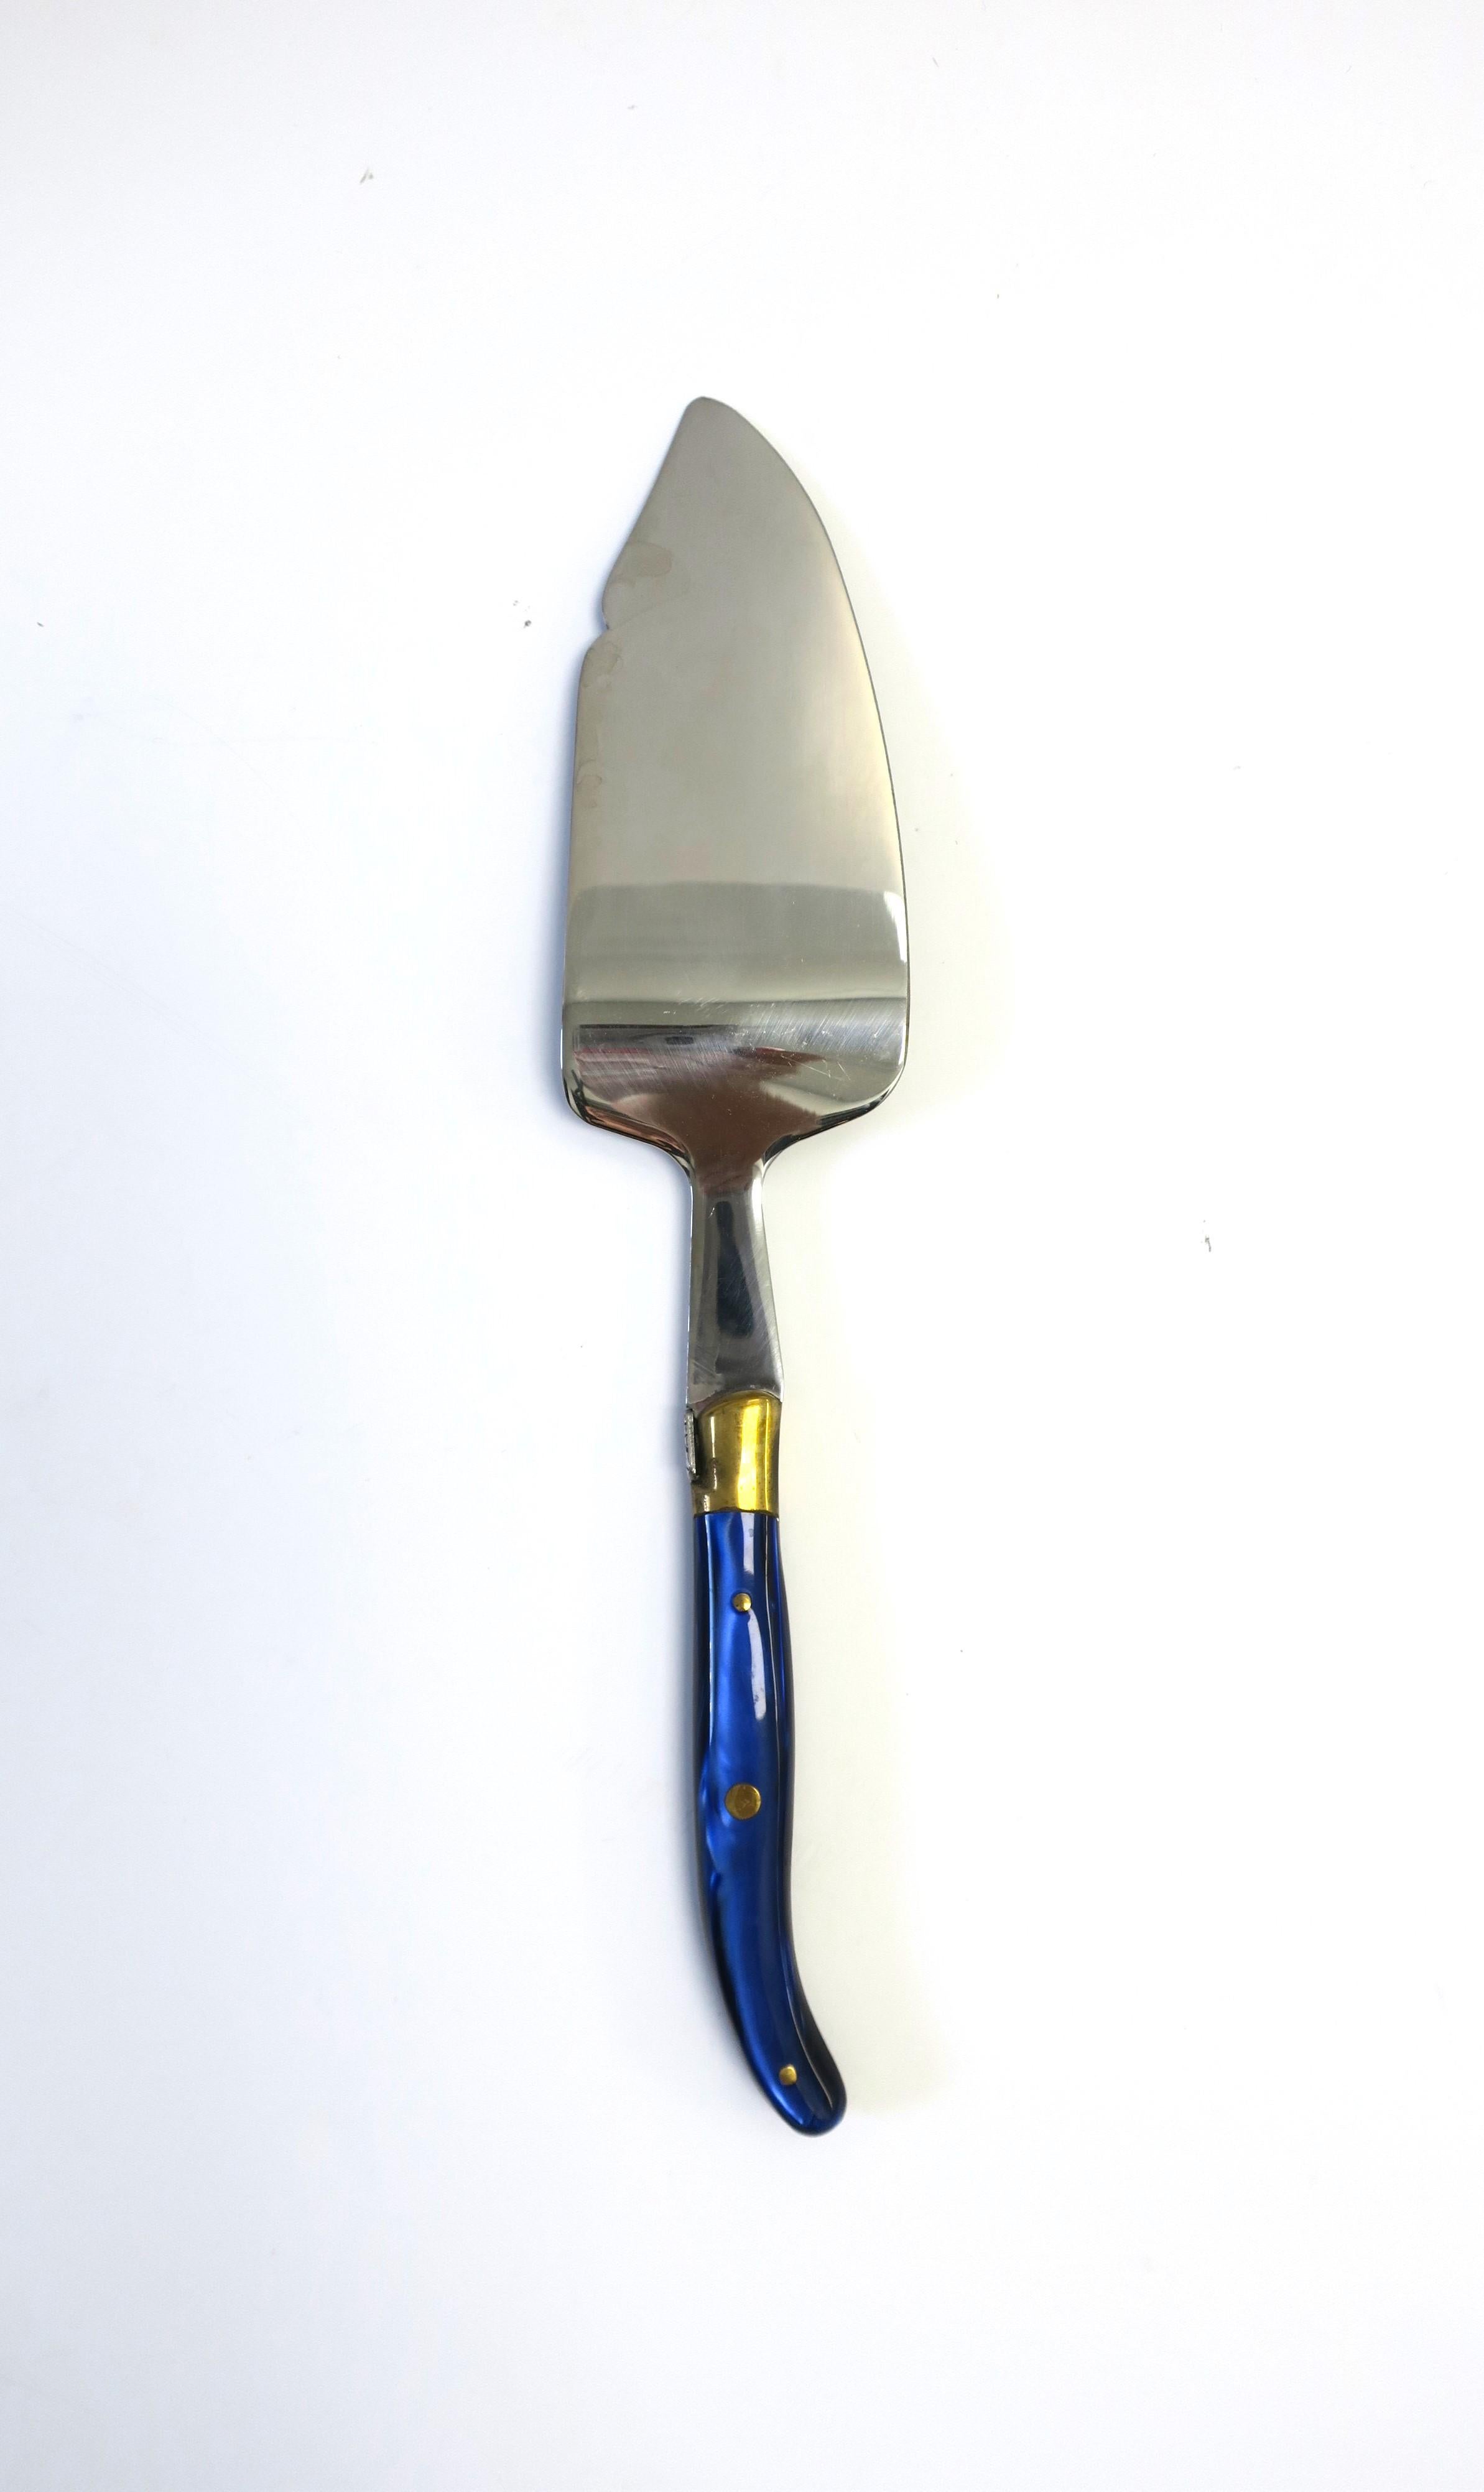 A well-made French cake tart pastry knife cutlery utensil and serving piece by Claude Dozorme, circa late 20th to early 21st century, France. Piece is stainless steel, brass, and finished with a resin cobalt blue handle. Made in France. Piece has